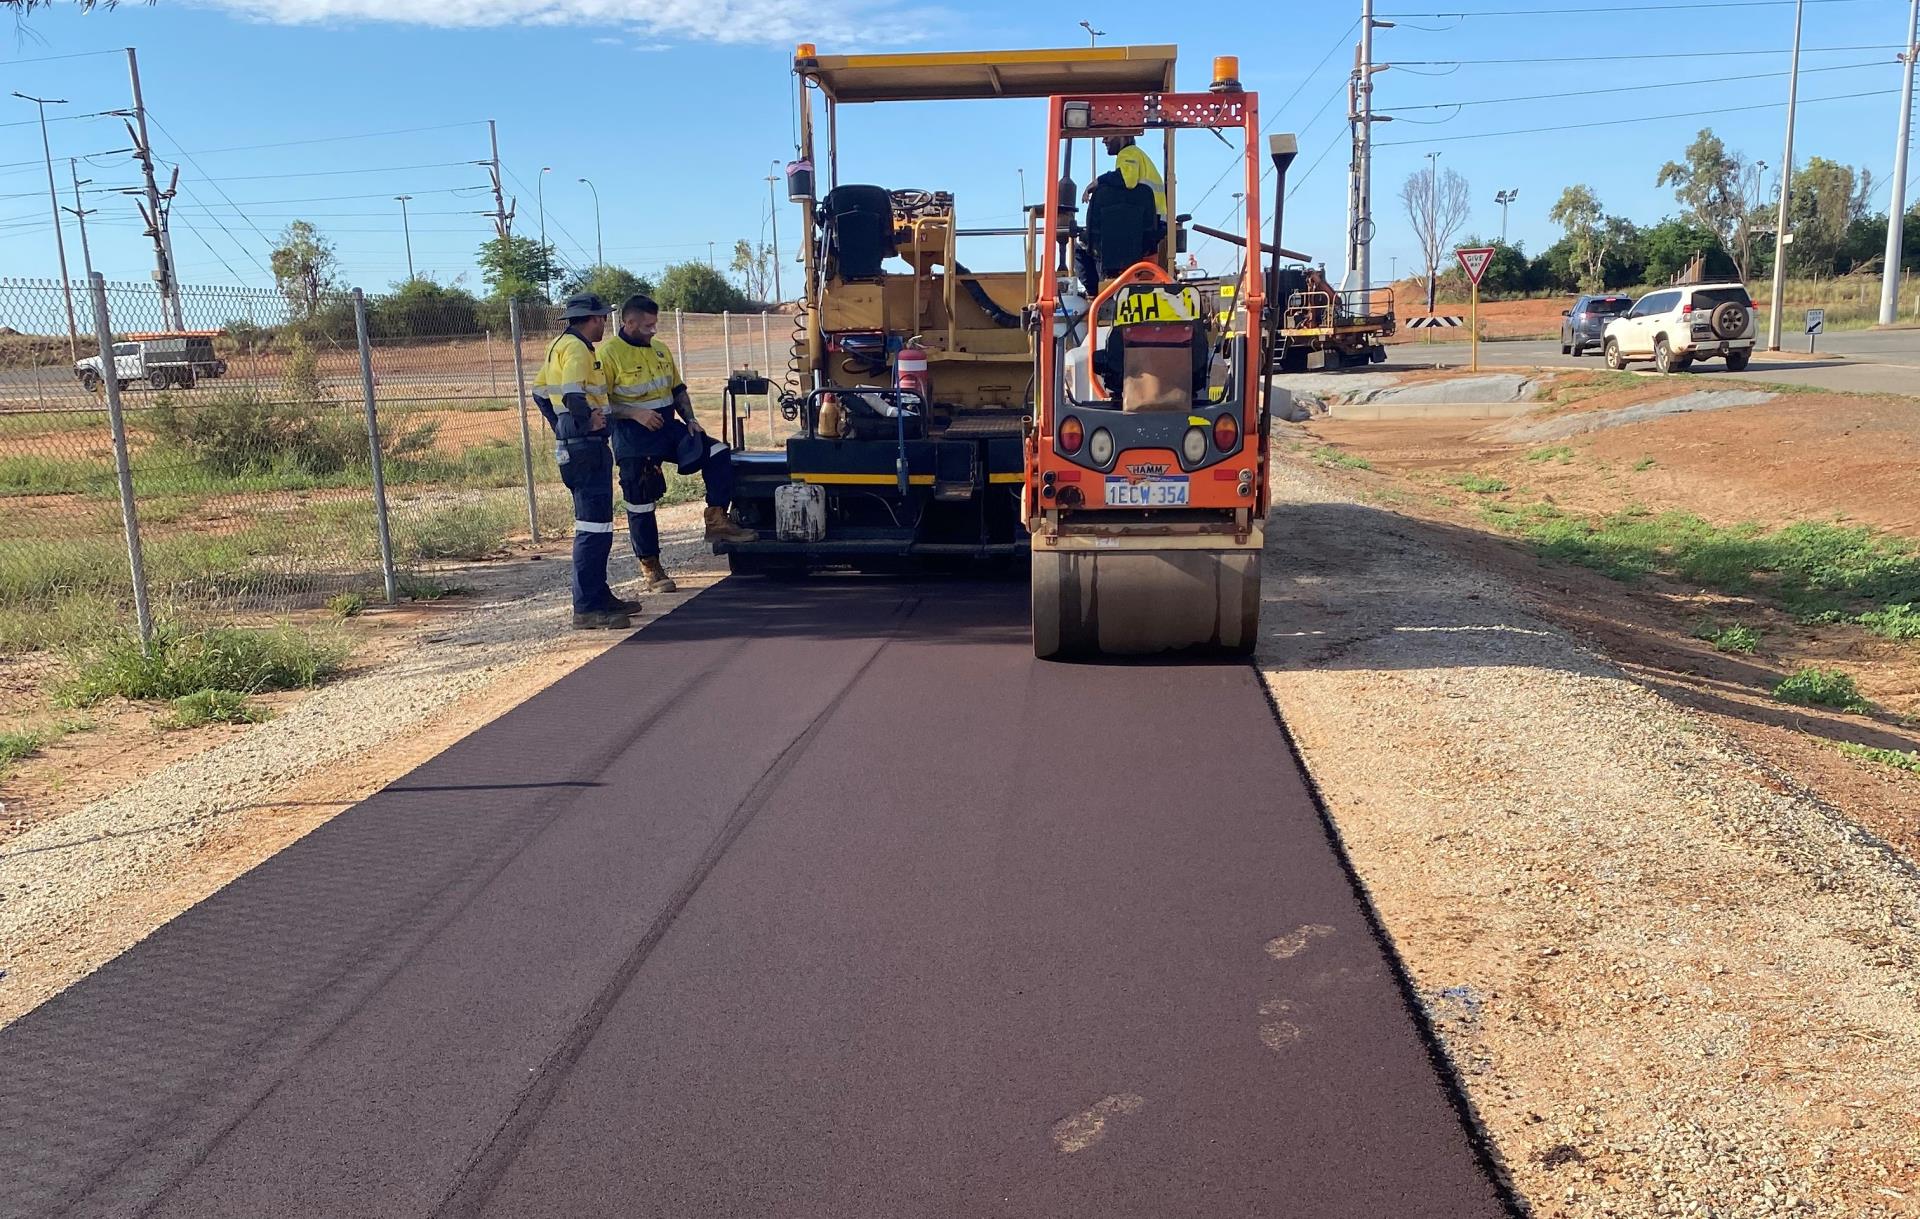 New path to connect Hedland